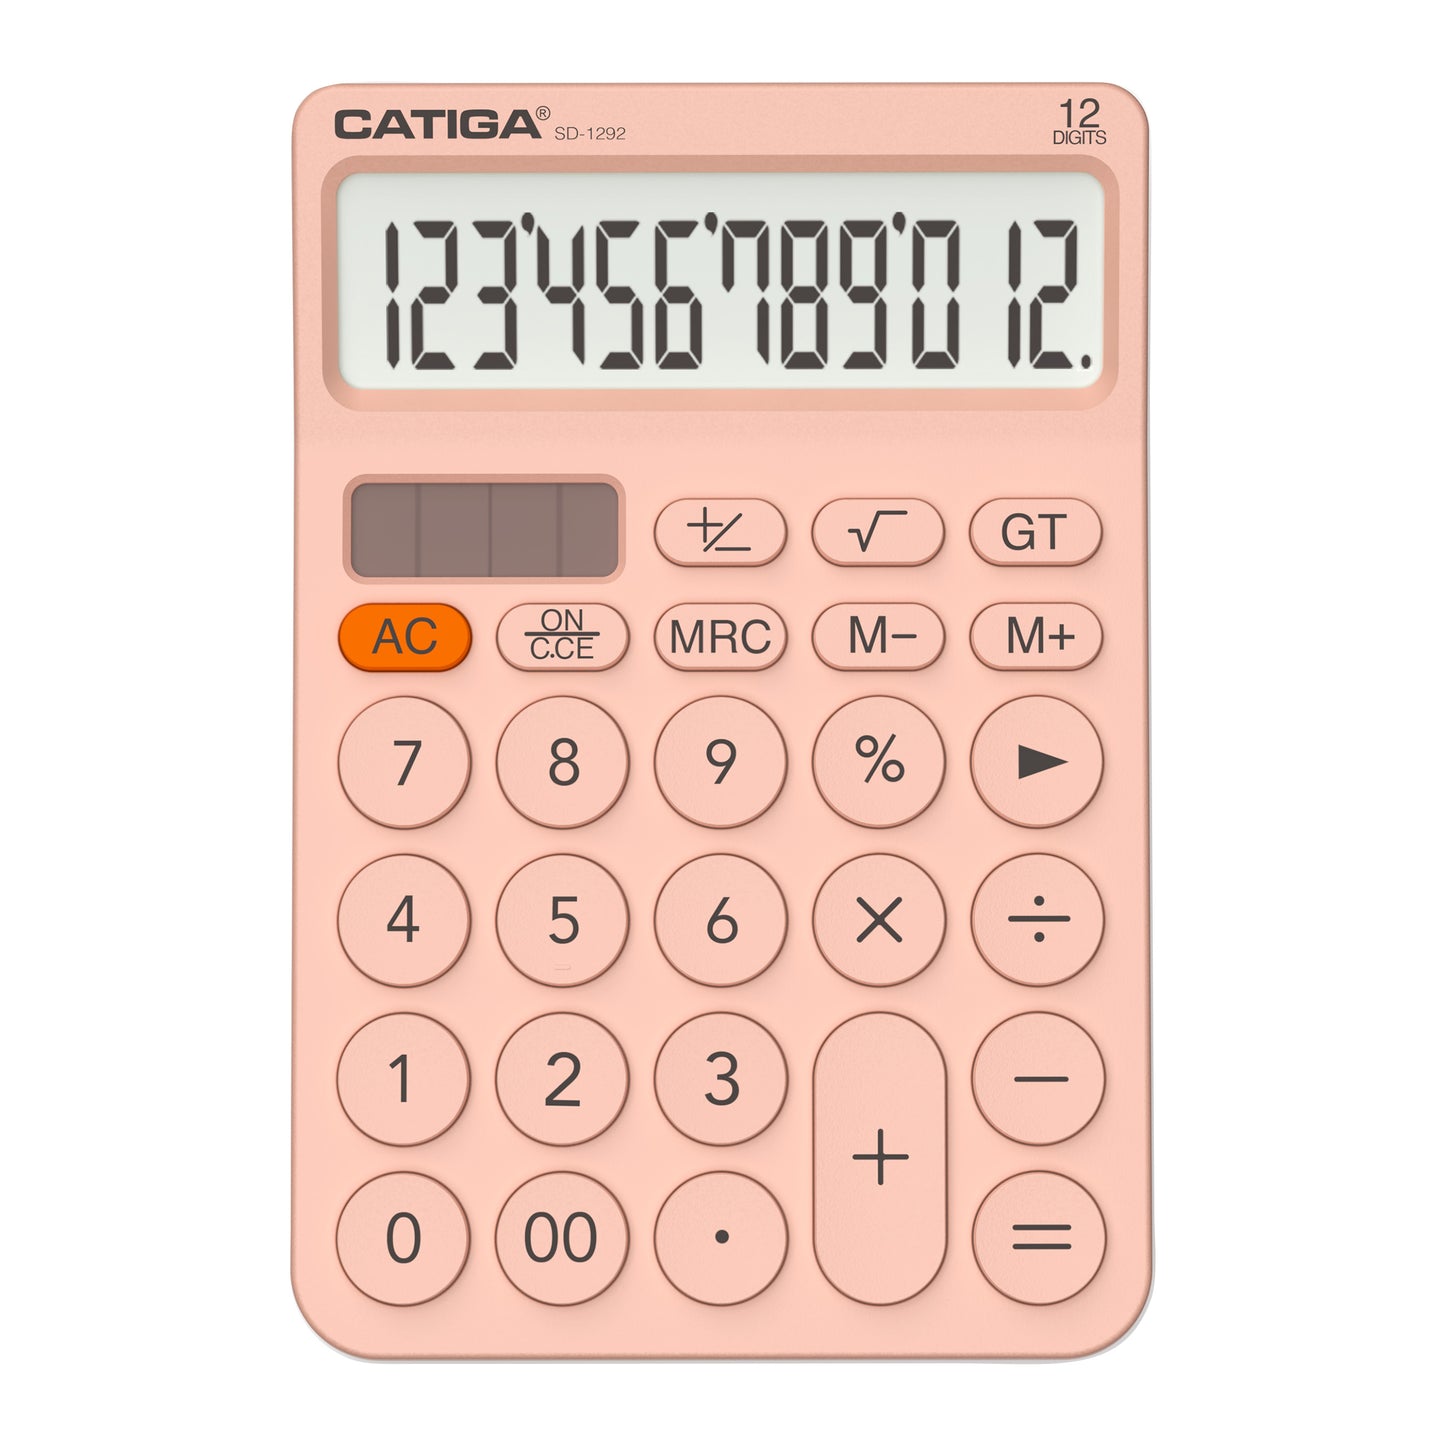 SD-1292 12-Digit Home and Office Calculator (Pink/Black)